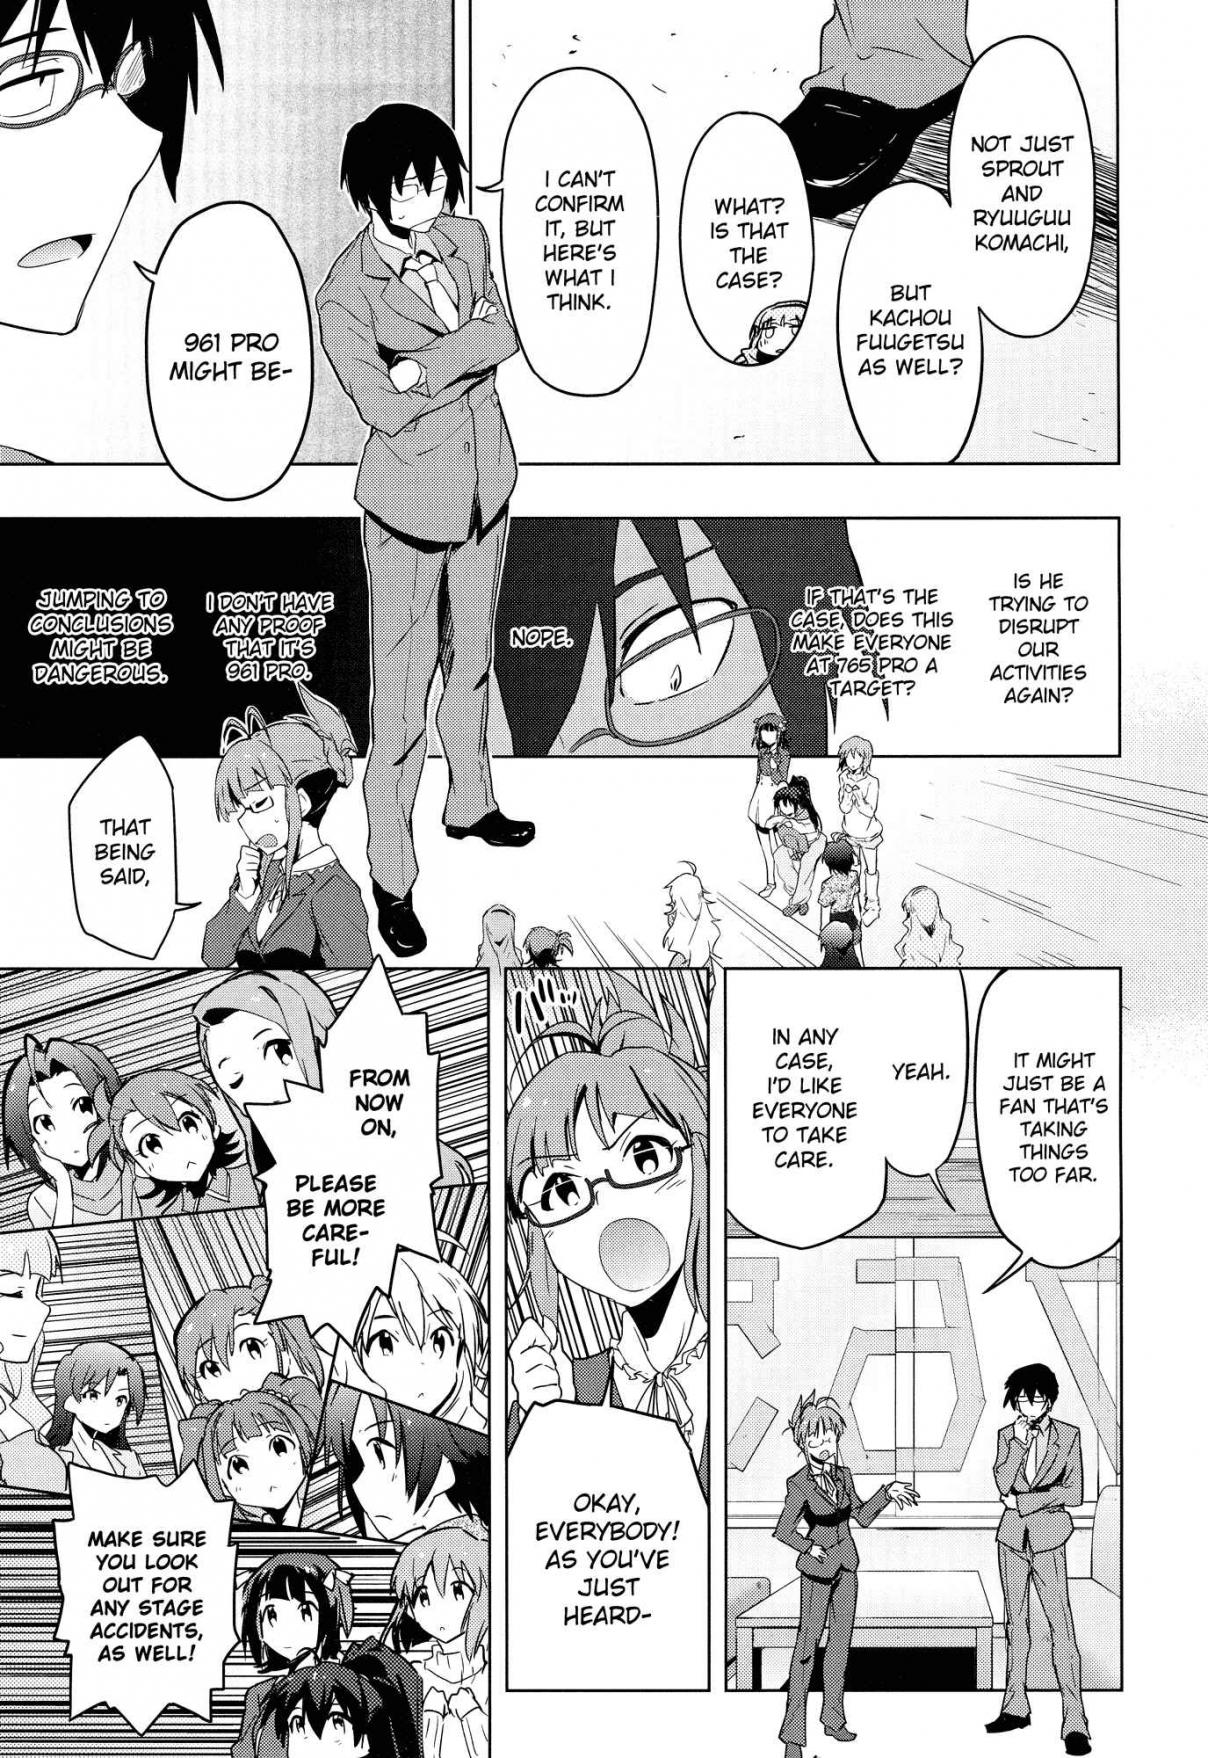 THE iDOLM@STER 2 The world is all one!! Vol. 4 Ch. 21 Stray and Hide